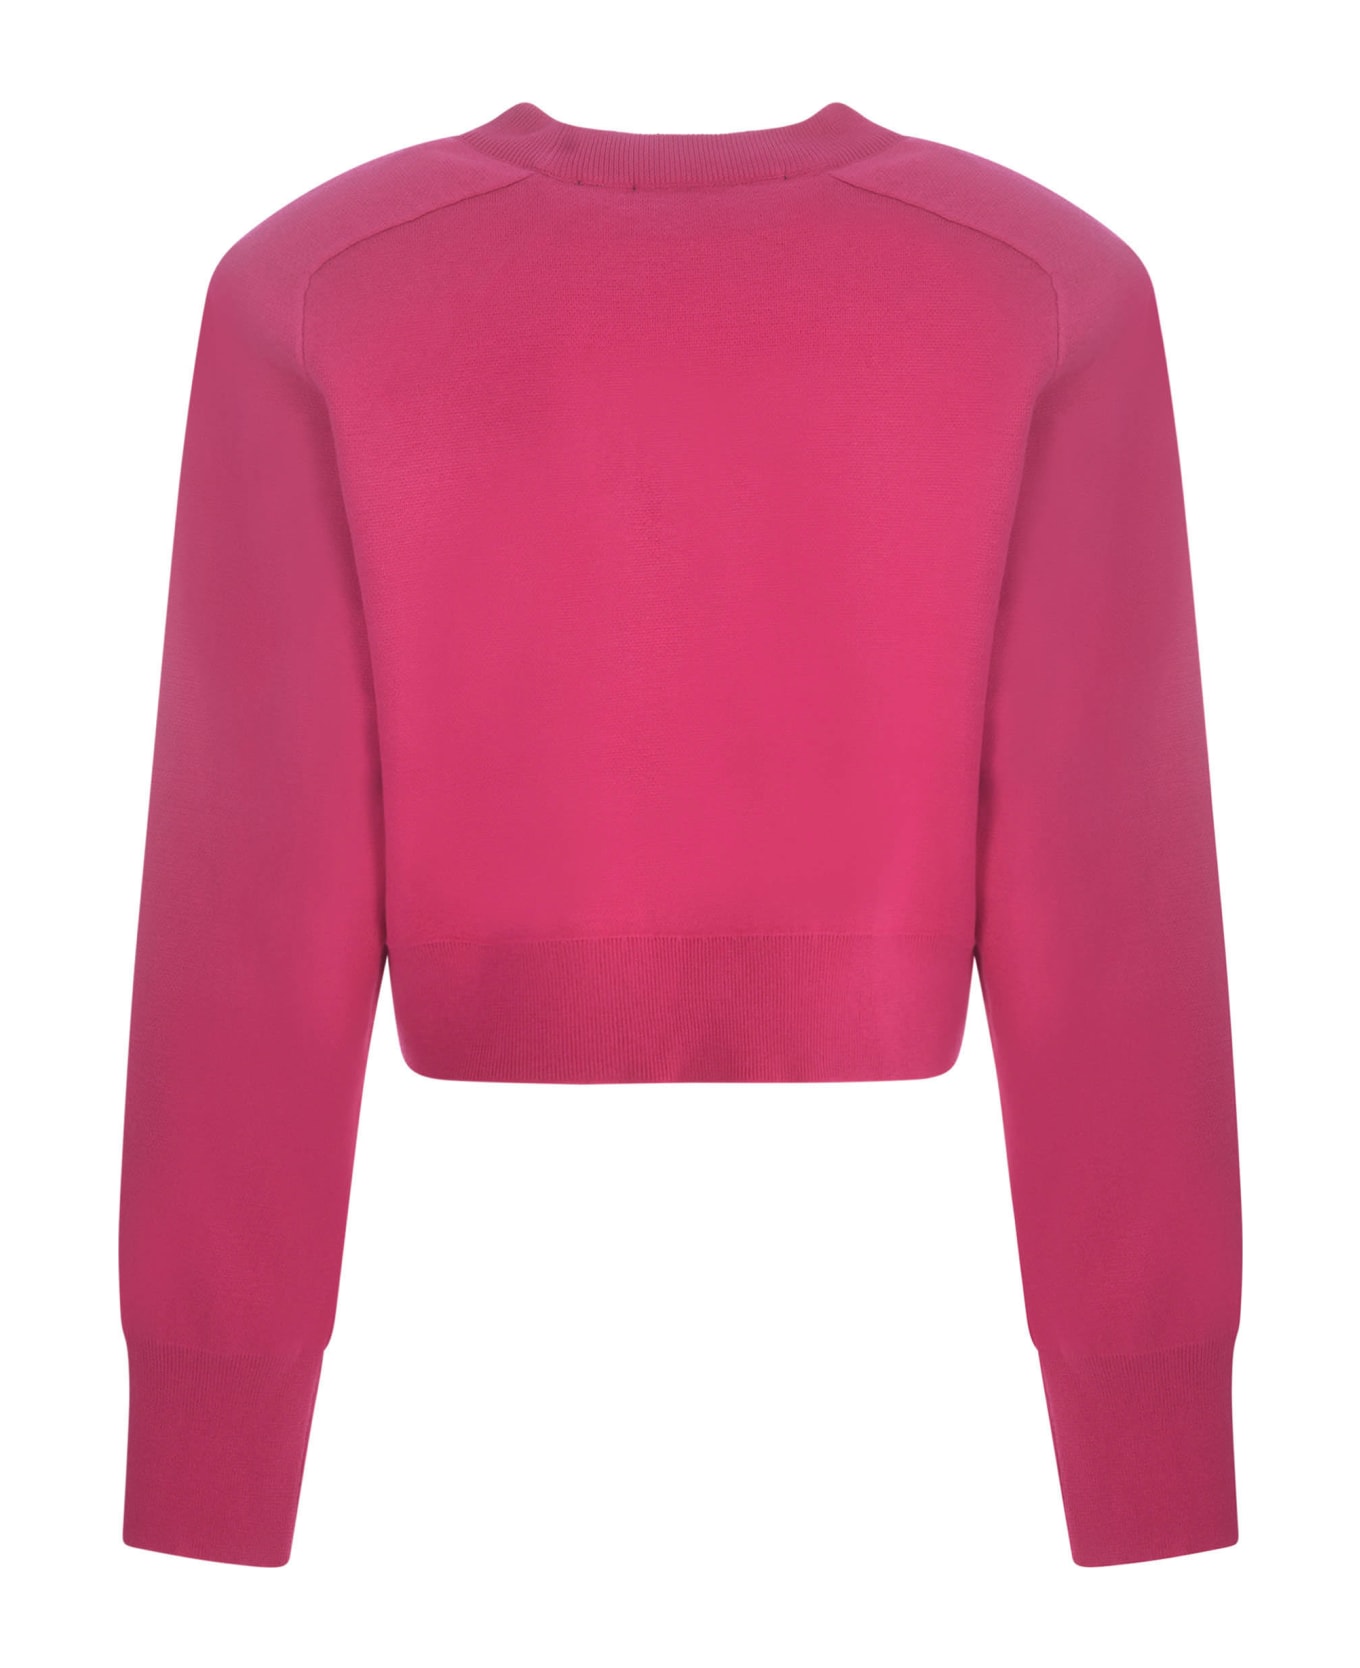 Rotate by Birger Christensen Sweatshirt Rotate In Cotton And Cashmere Blend - Fucsia フリース